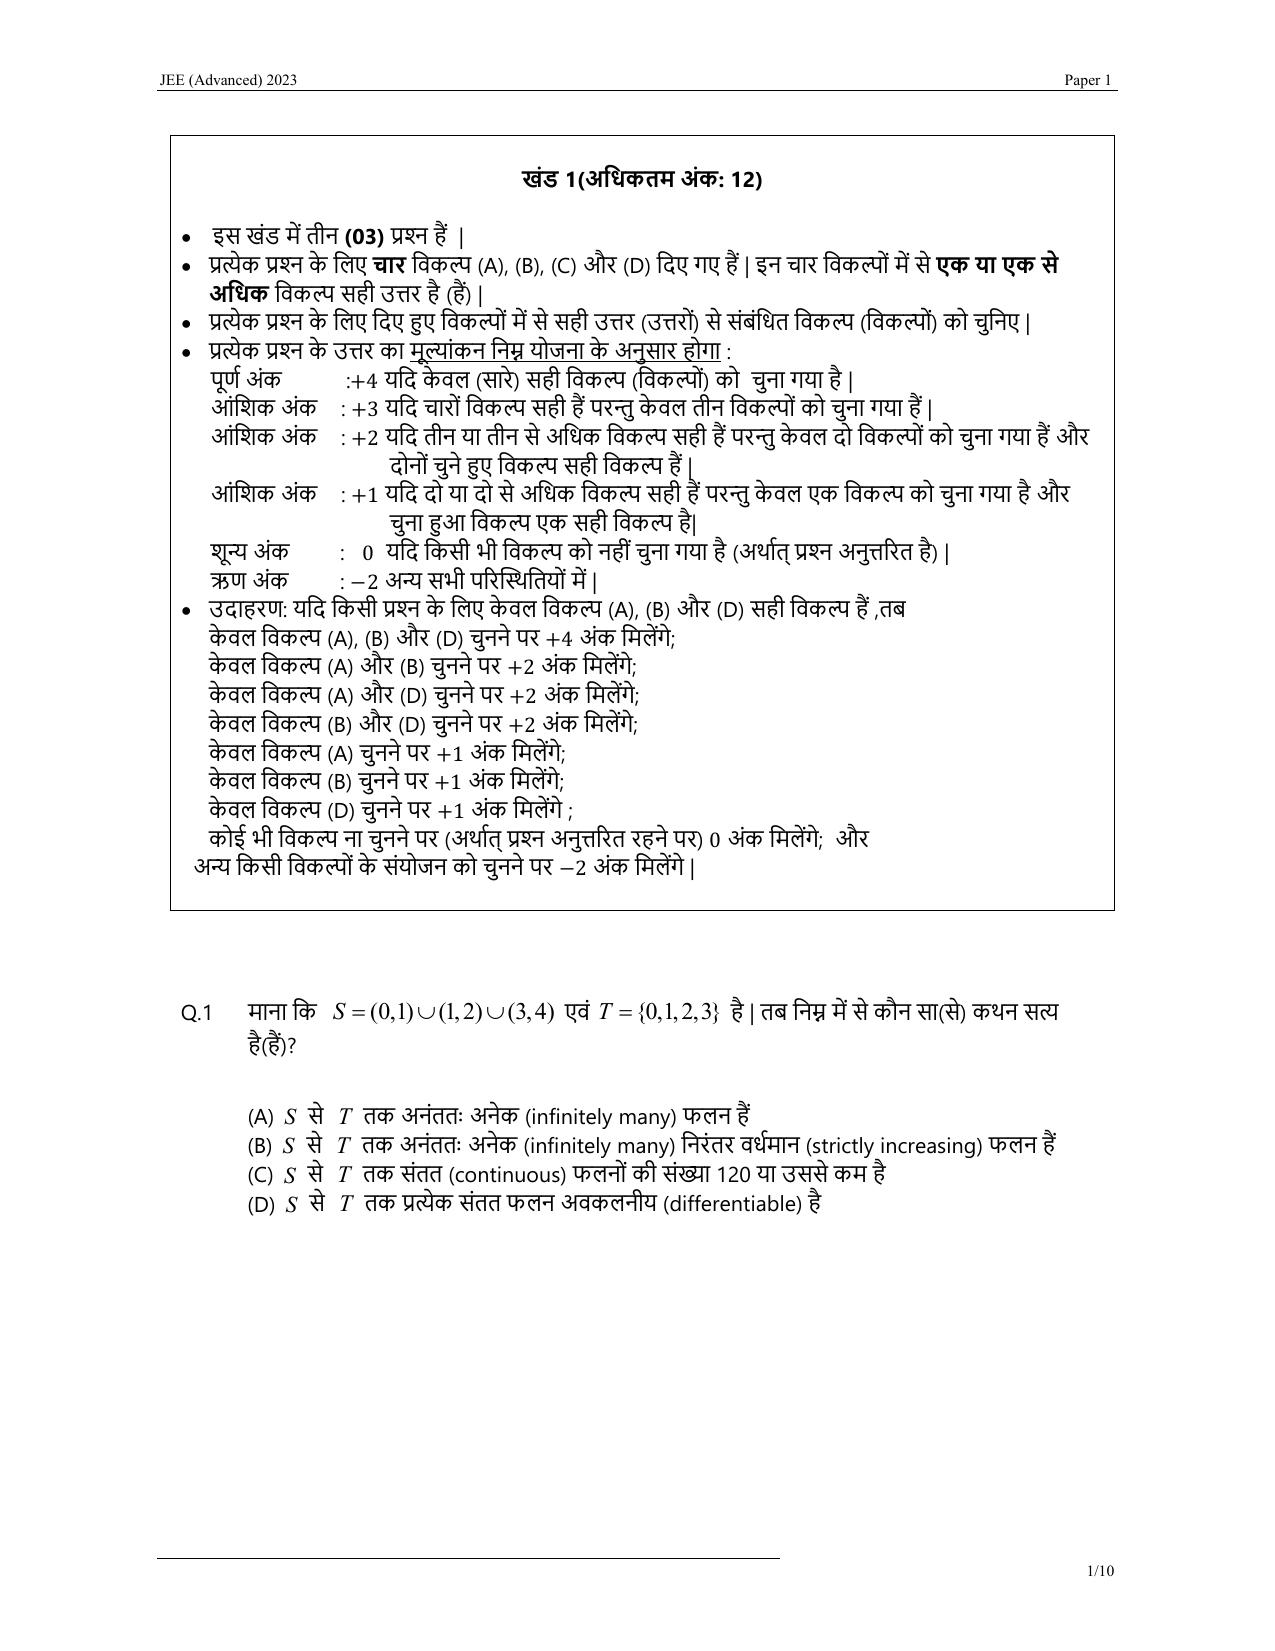 JEE Advanced 2023 Question Paper 1 (Hindi) - Page 1